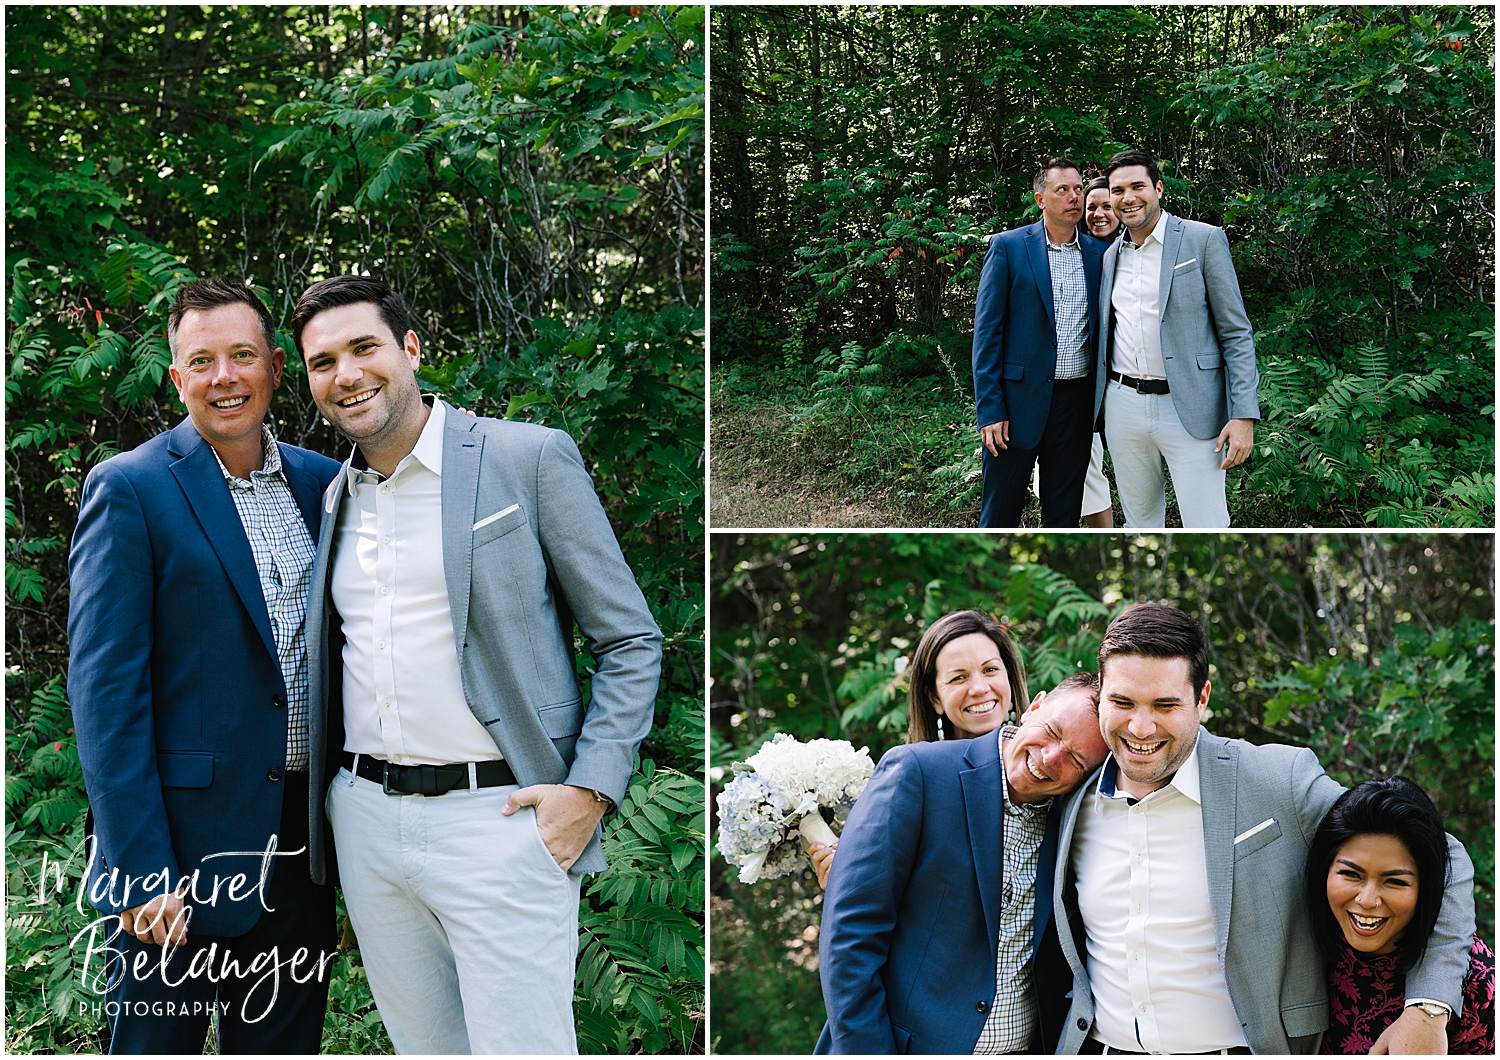 Three candid wedding photos showing the groom and his best man and the bride and the best man's fiancee.